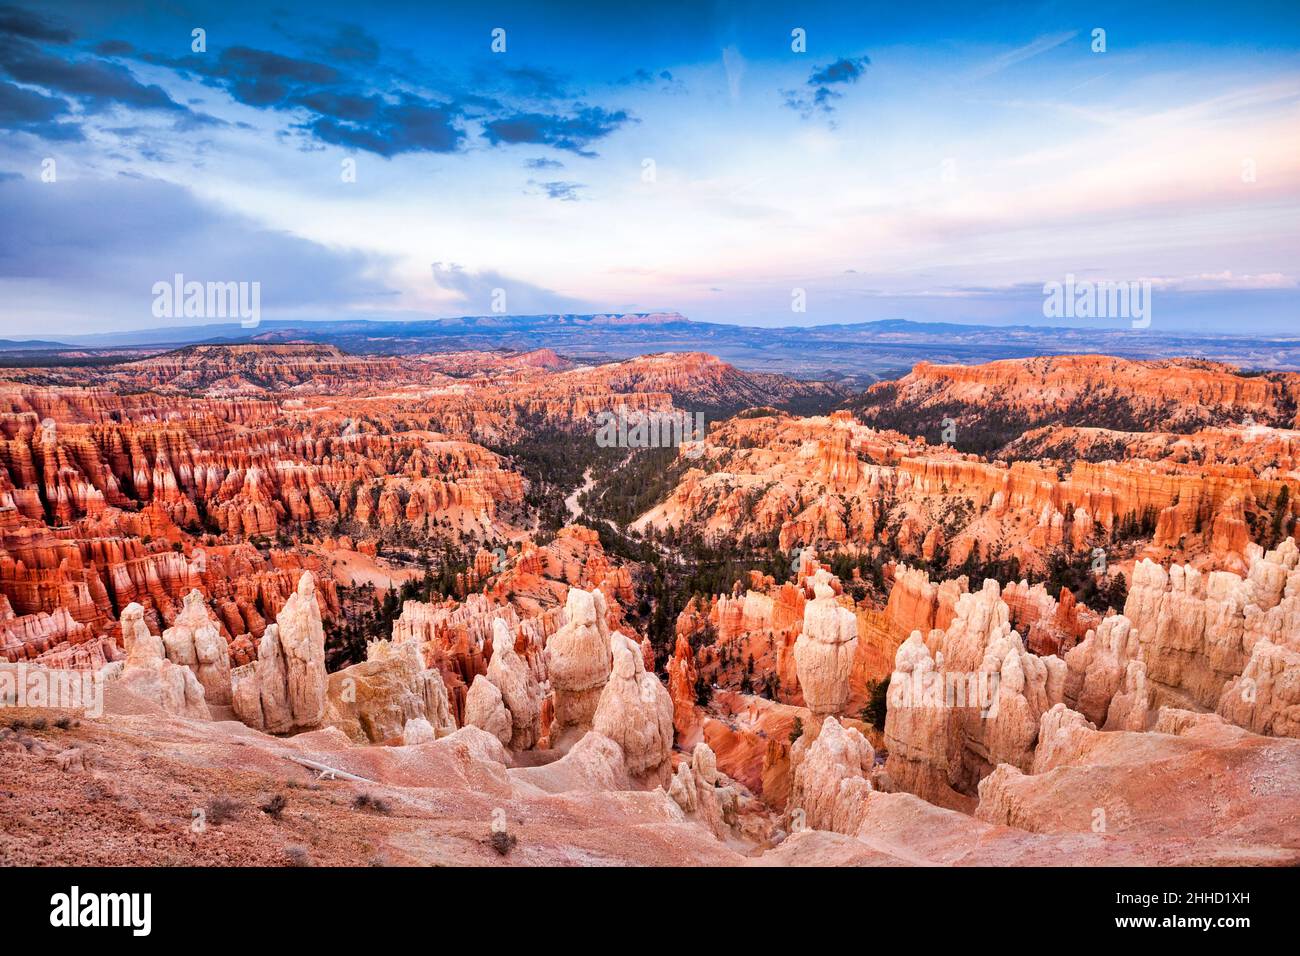 View from Bryce Point, Bryce Canyon National Park, Utah, USA, after sunset. Stock Photo